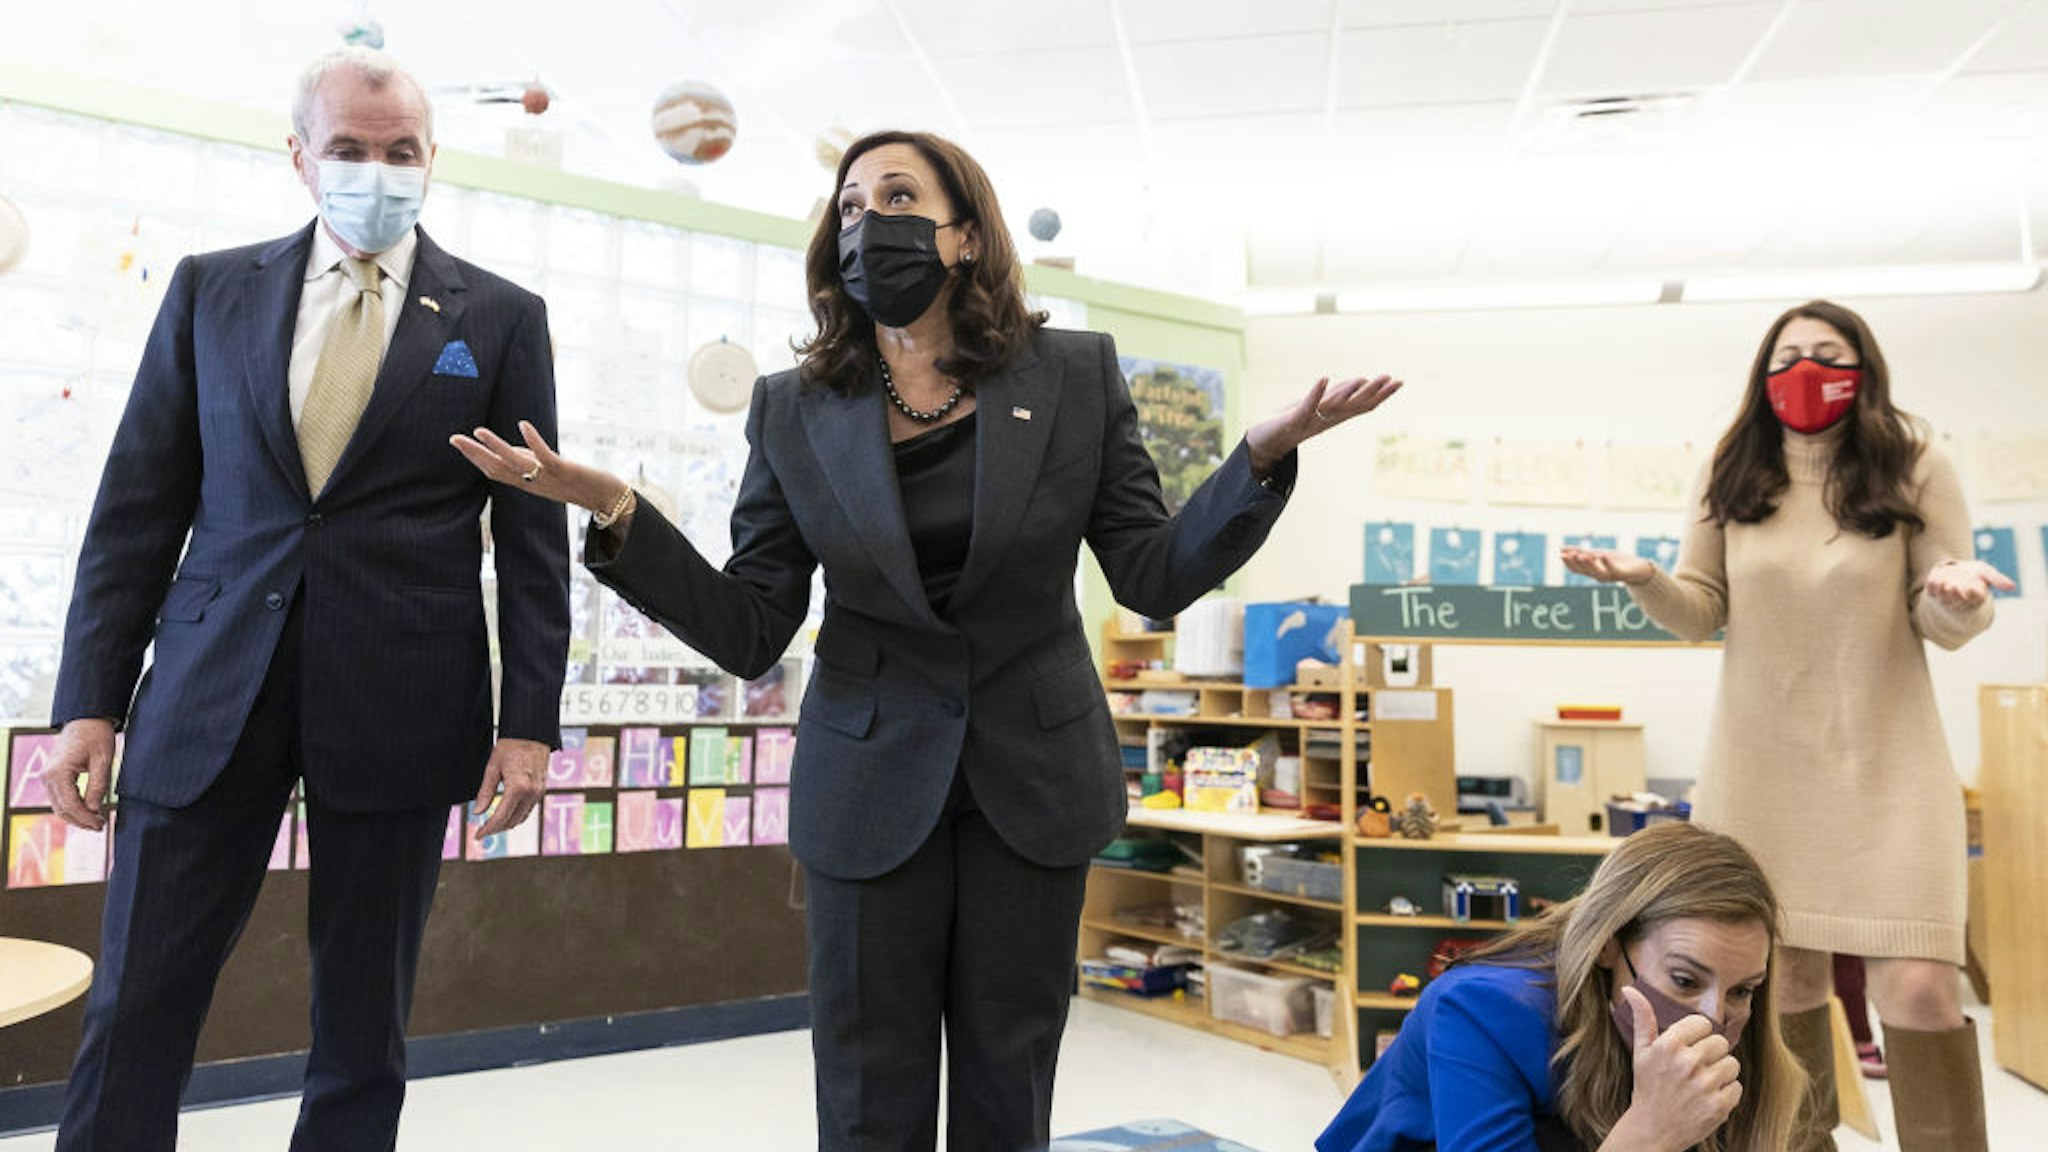 Phil Murphy, New Jersey's governor, left, and U.S. Vice President Kamala Harris speak with children at Ben Samuels Childrens Center at Montclair State University in Little Falls, New Jersey, U.S., on Friday, Oct. 8, 2021.